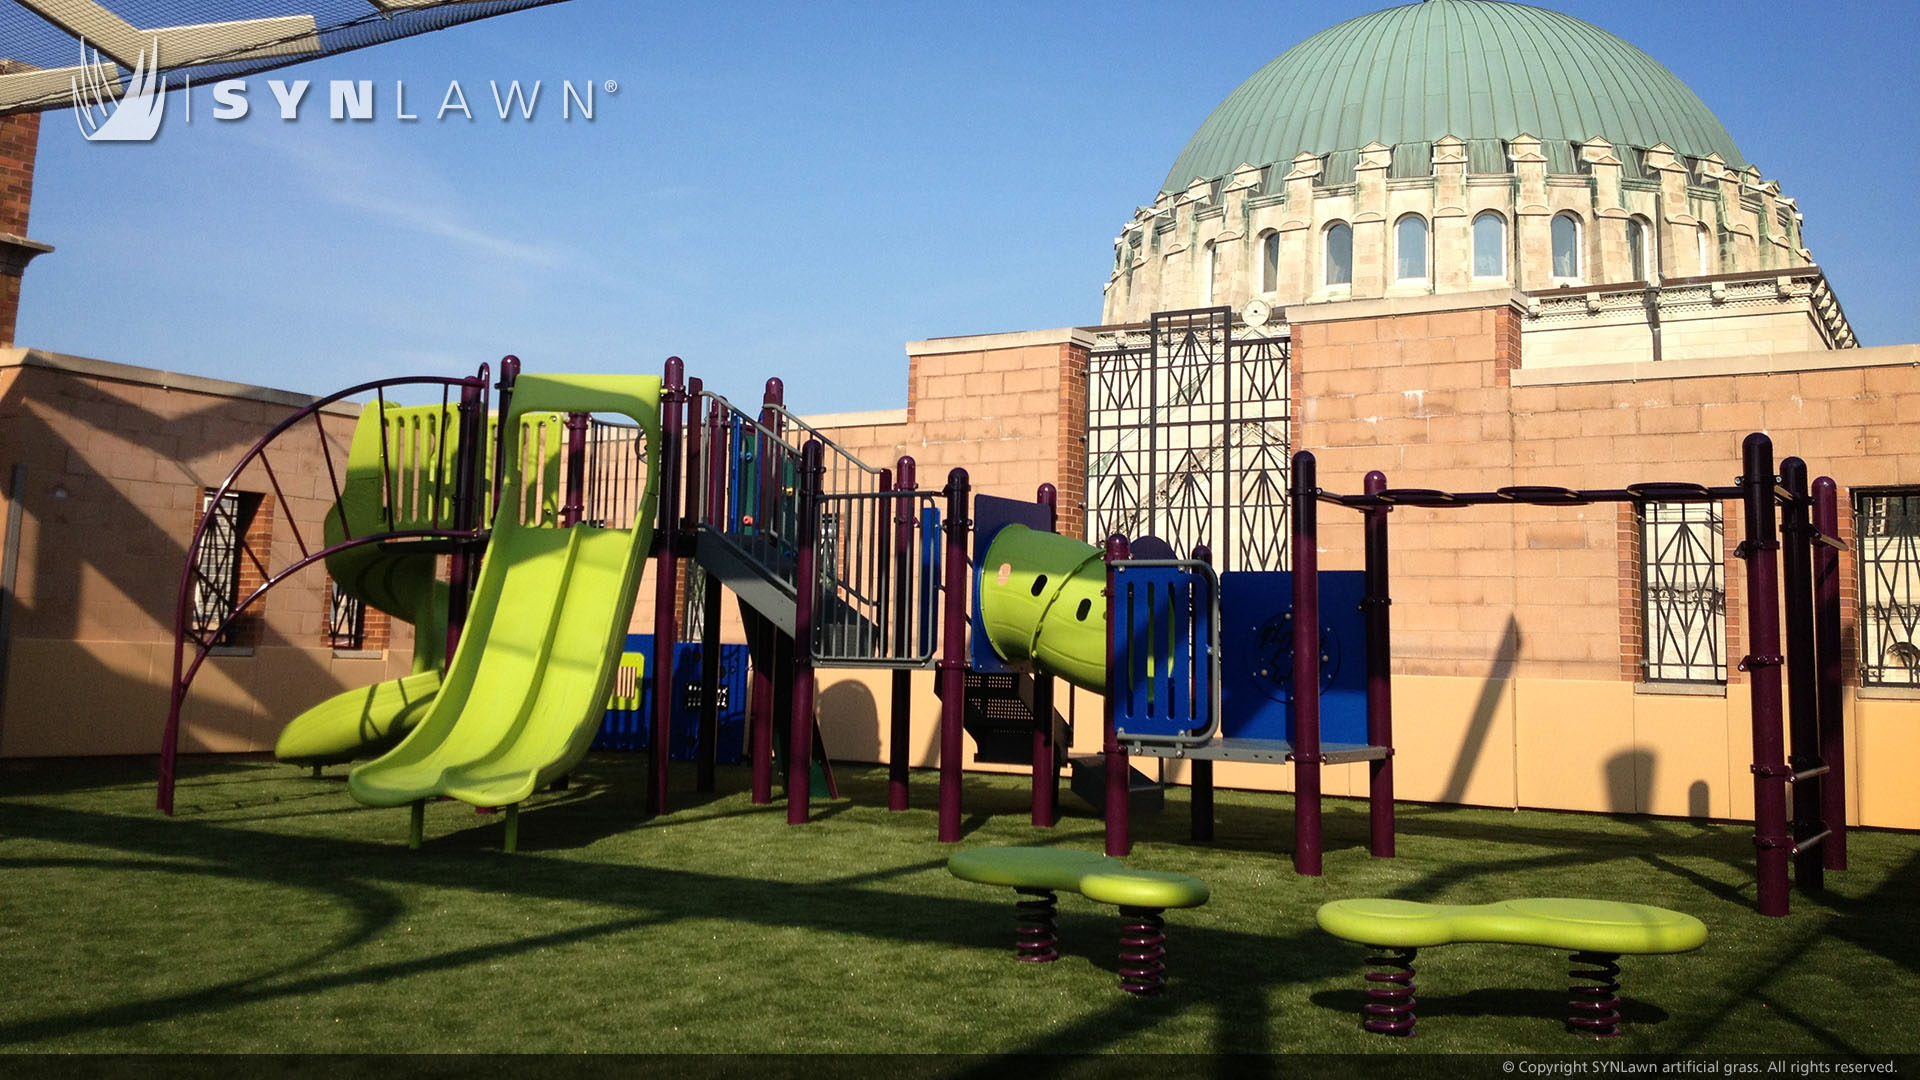 Commercial rooftop with artificial playground grass